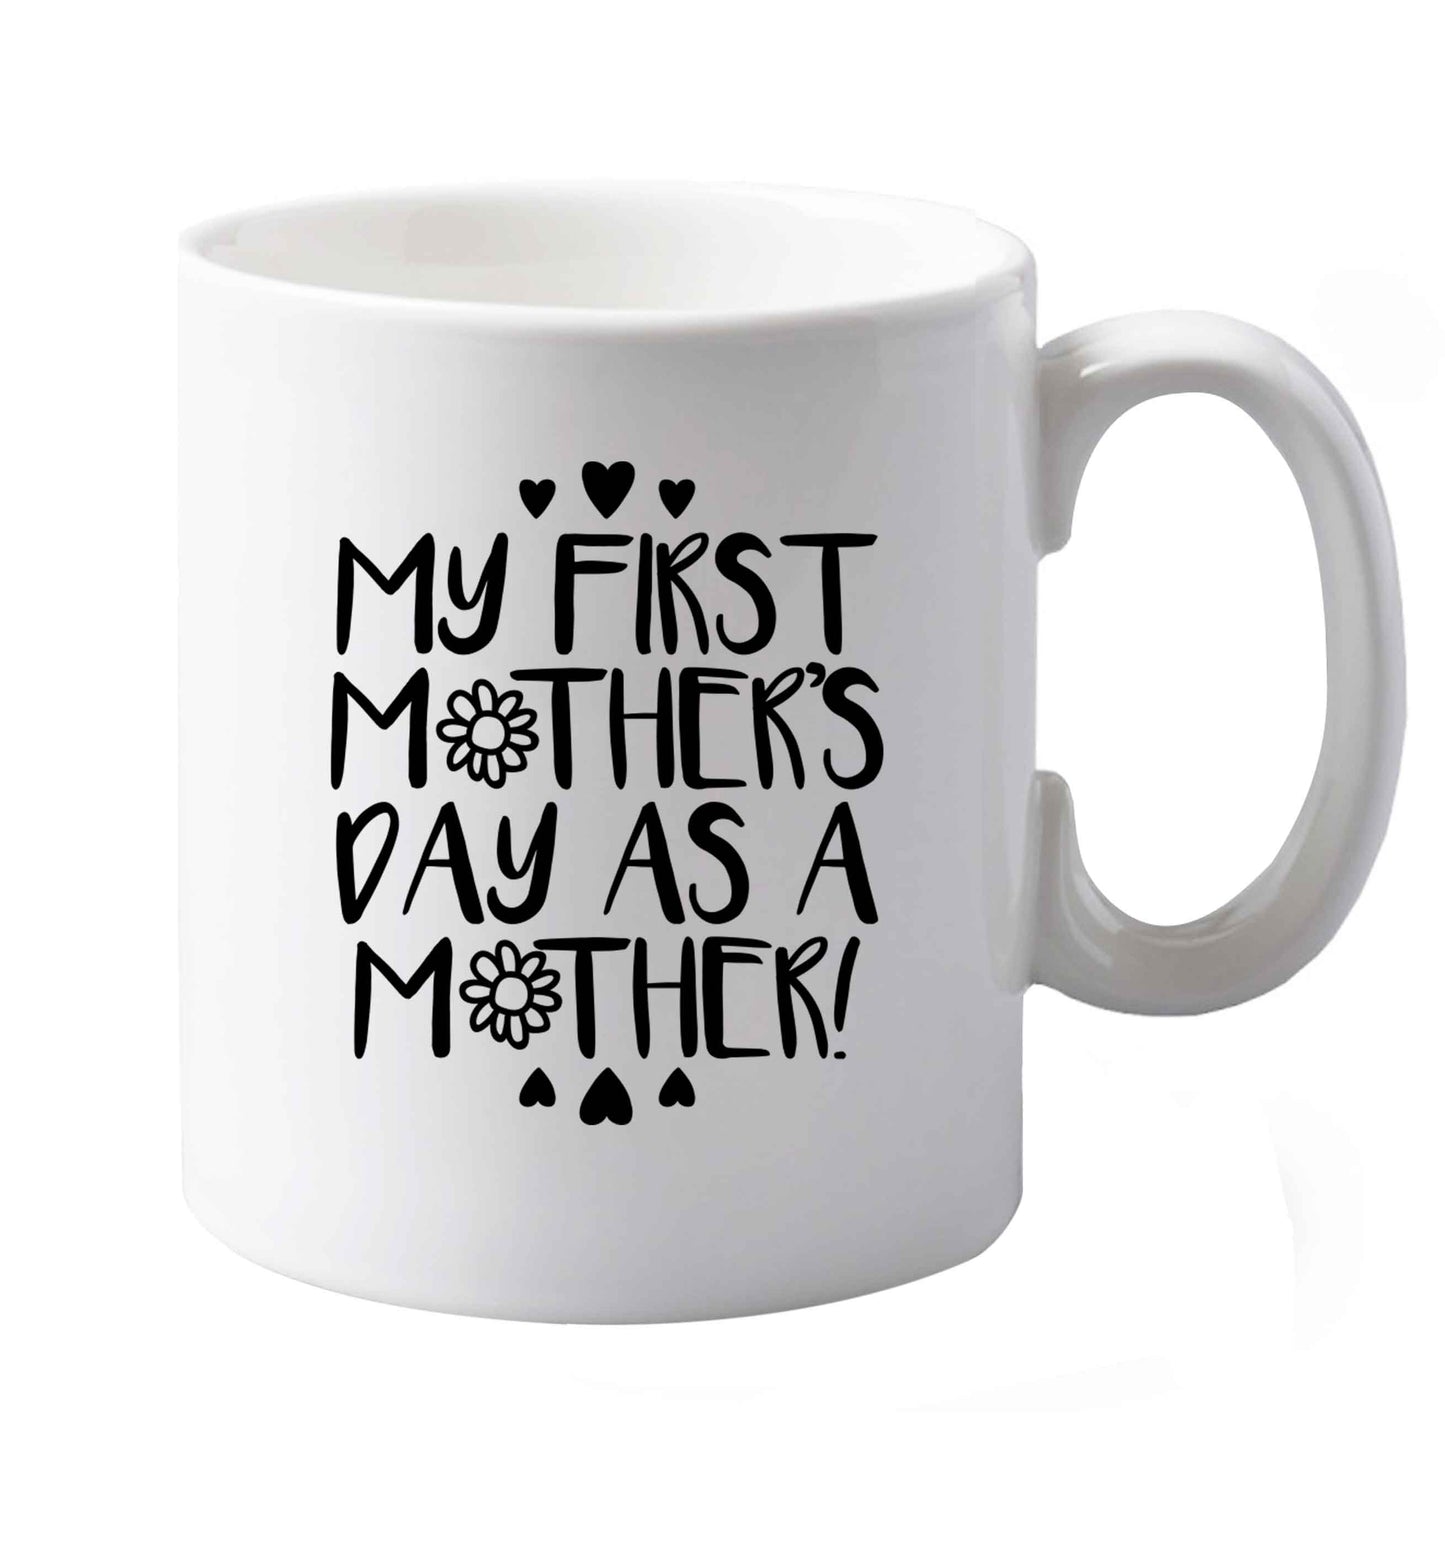 10 oz It's my first mother's day as a mother ceramic mug both sides